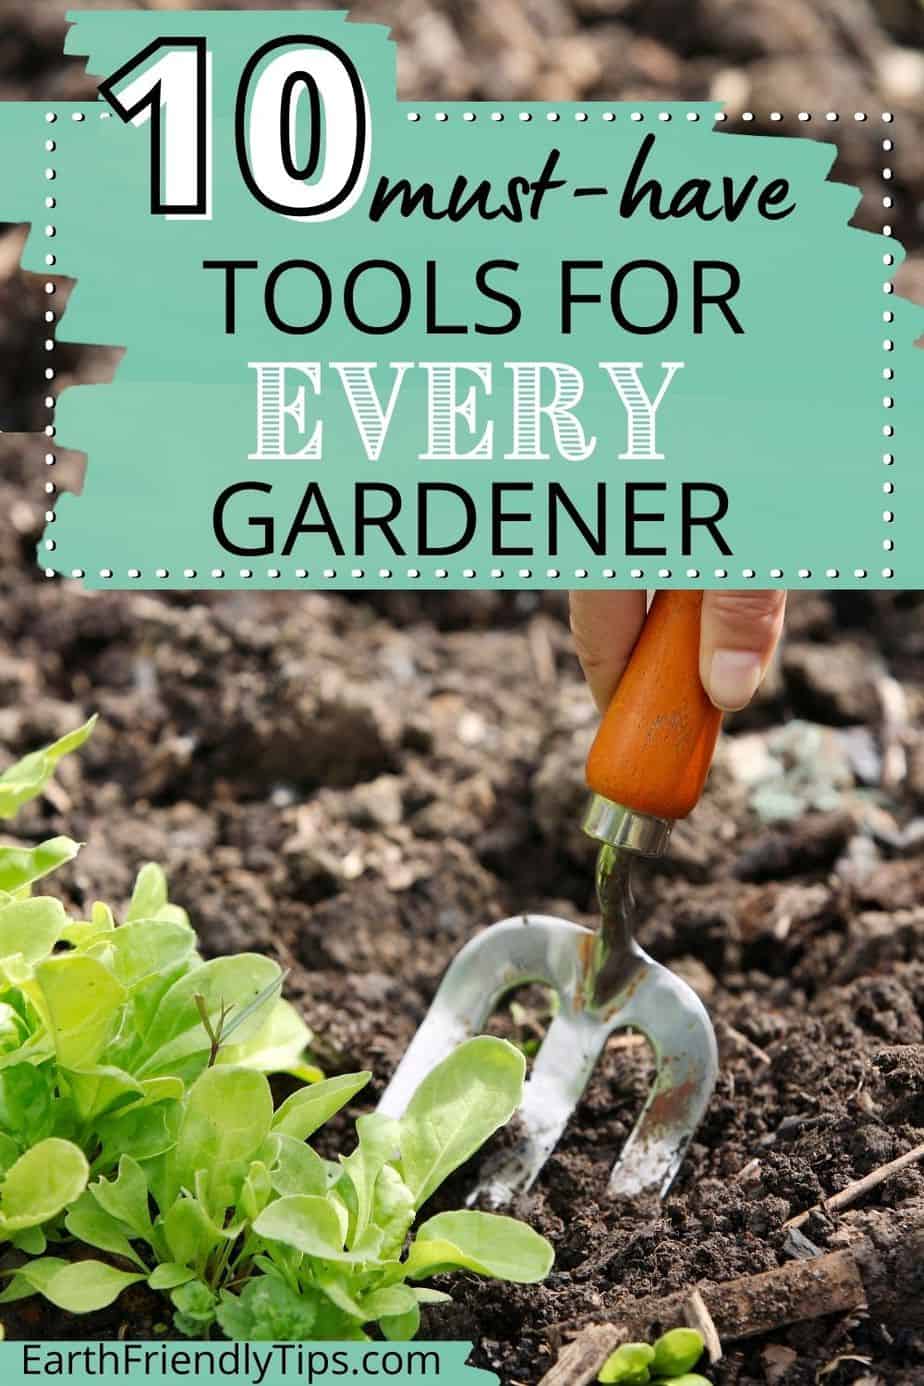 Person digging soil with cultivator with text overlay 10 Must-Have Tools for Every Gardener